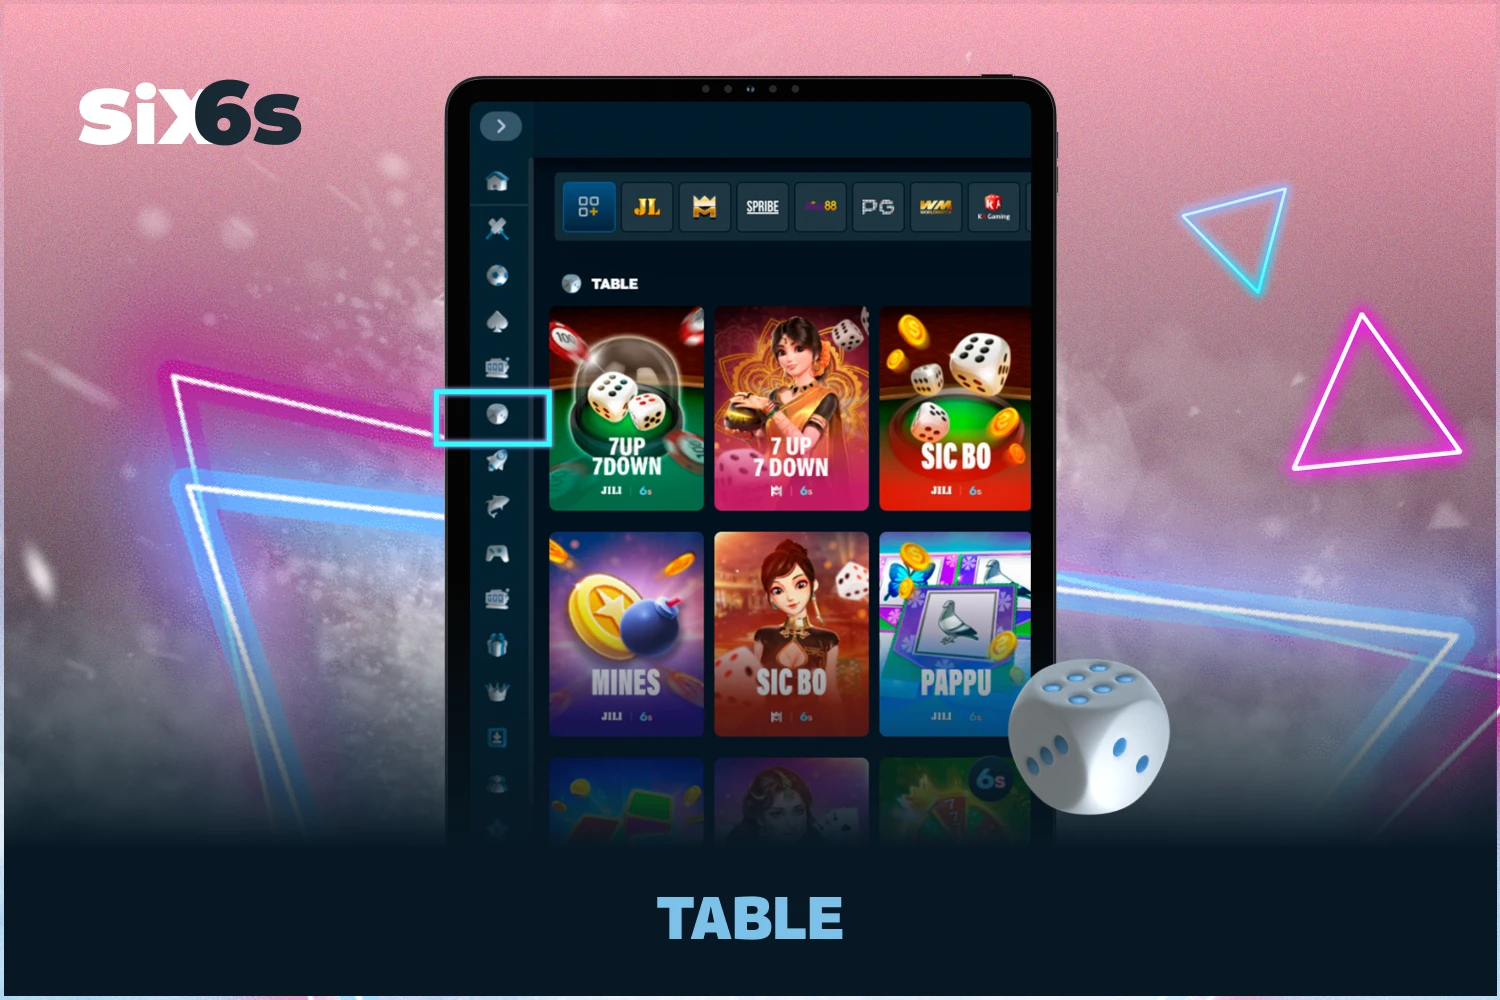 Table games are a genre of Six6s casino games based on classic popular games such as blackjack, craps, roulette and baccarat